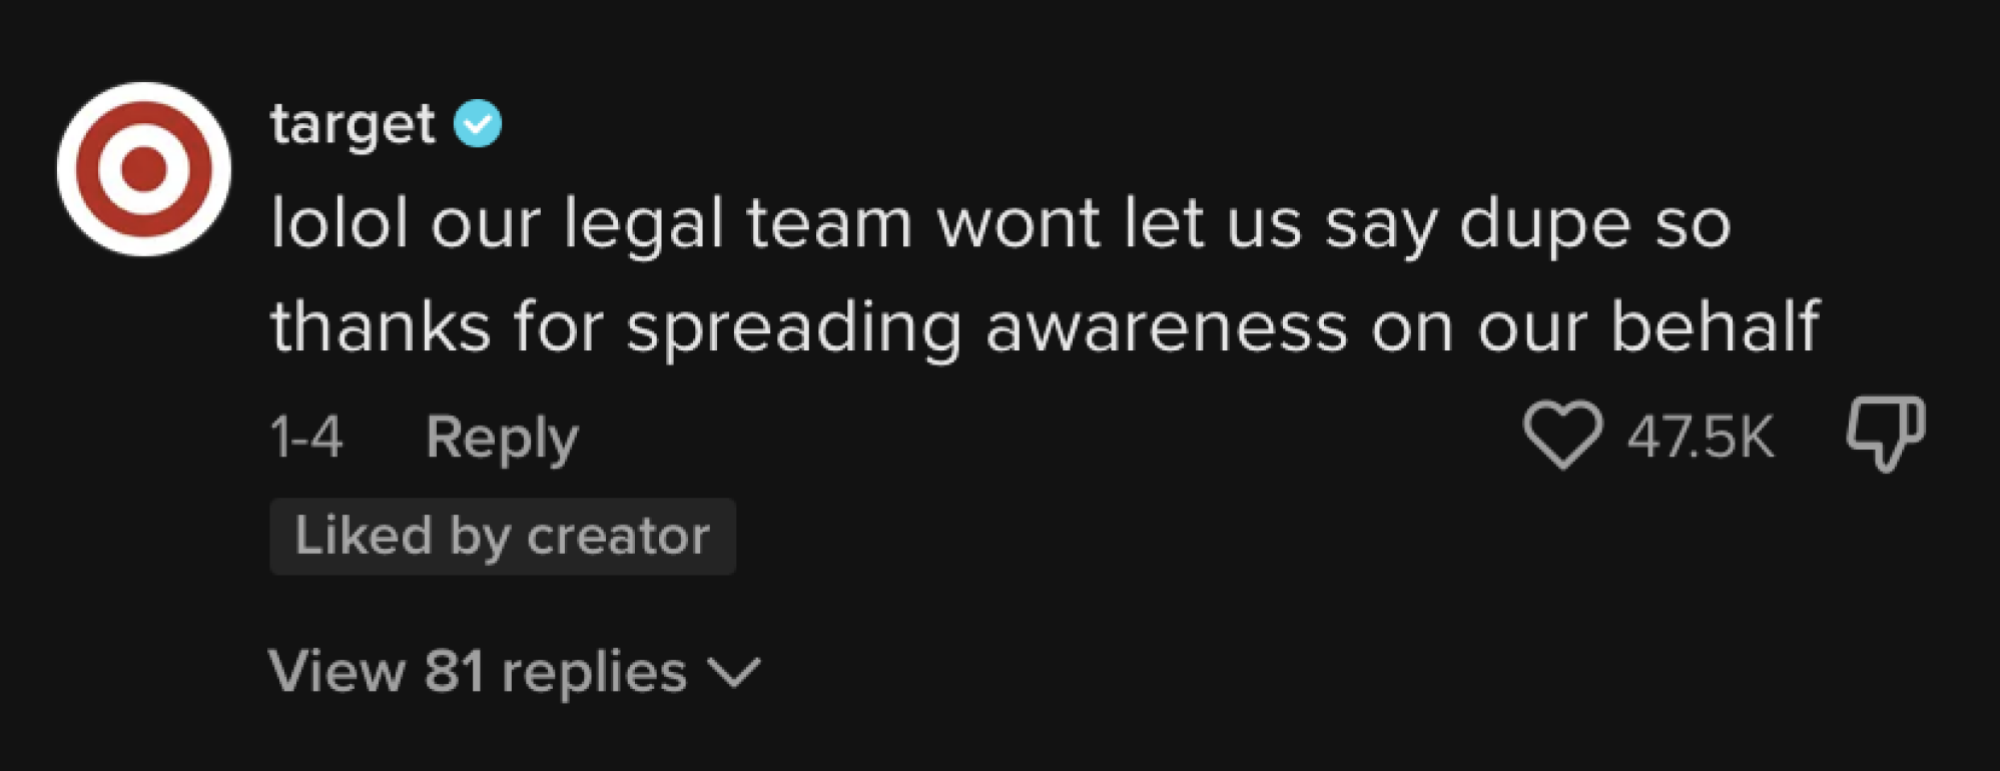 screengrab of TikTok comment from Target saying "lolol our legal team wont let us say dupe so thanks for spreading awareness on our behalf"